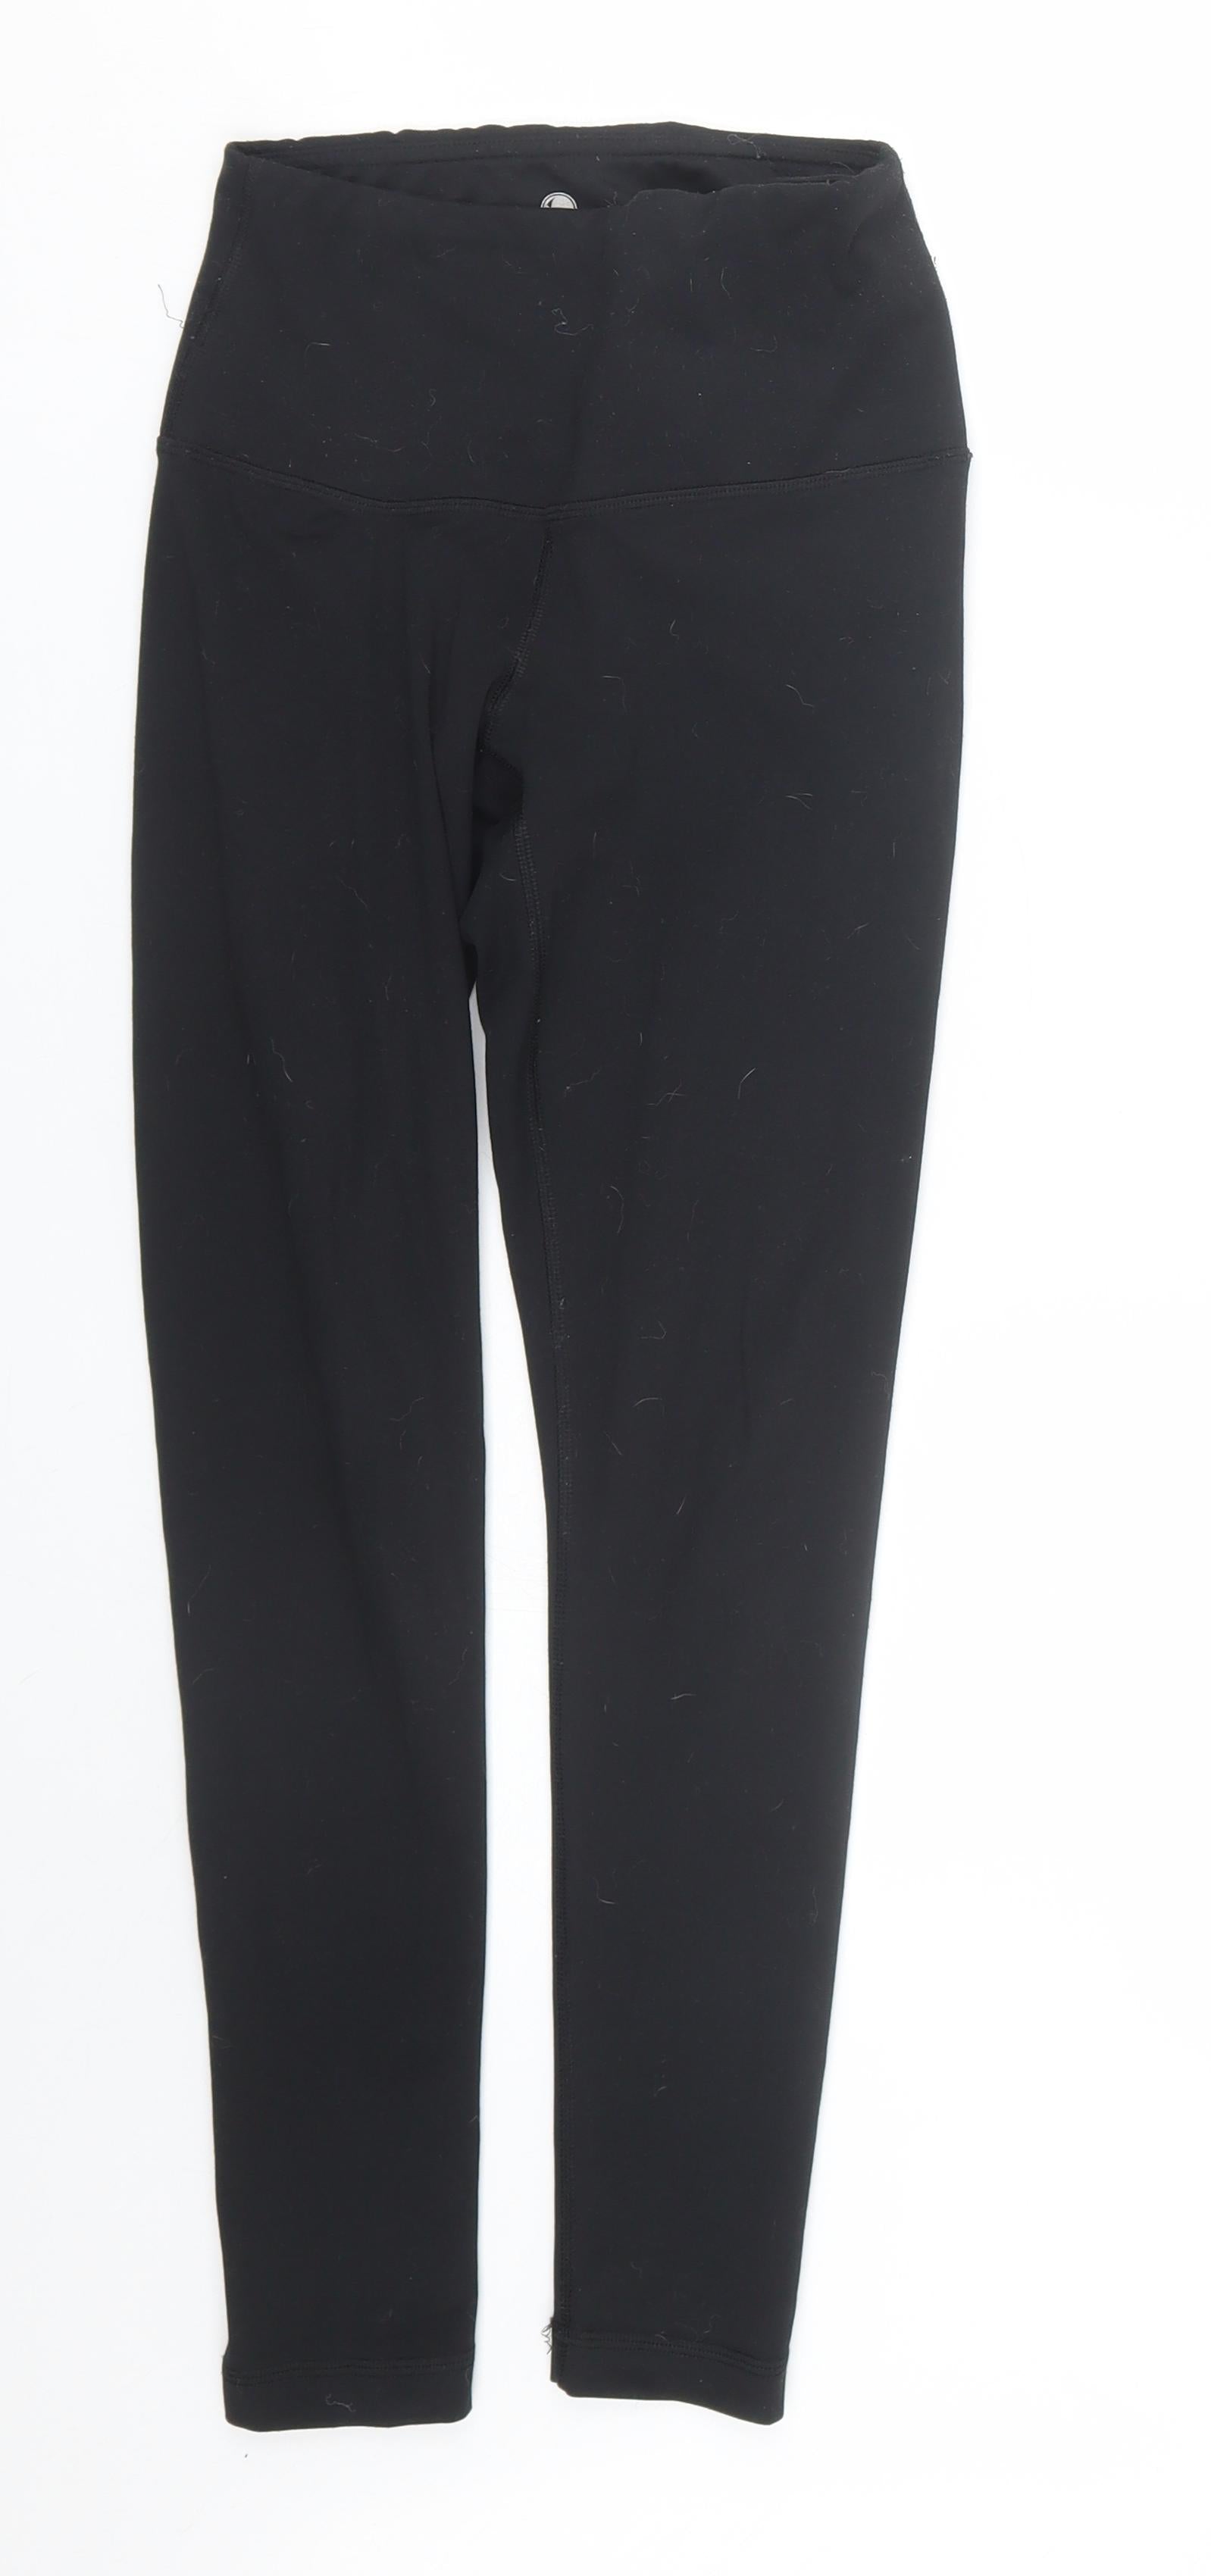 Yogalicious Womens Black Compression Leggings Size XS L24 in